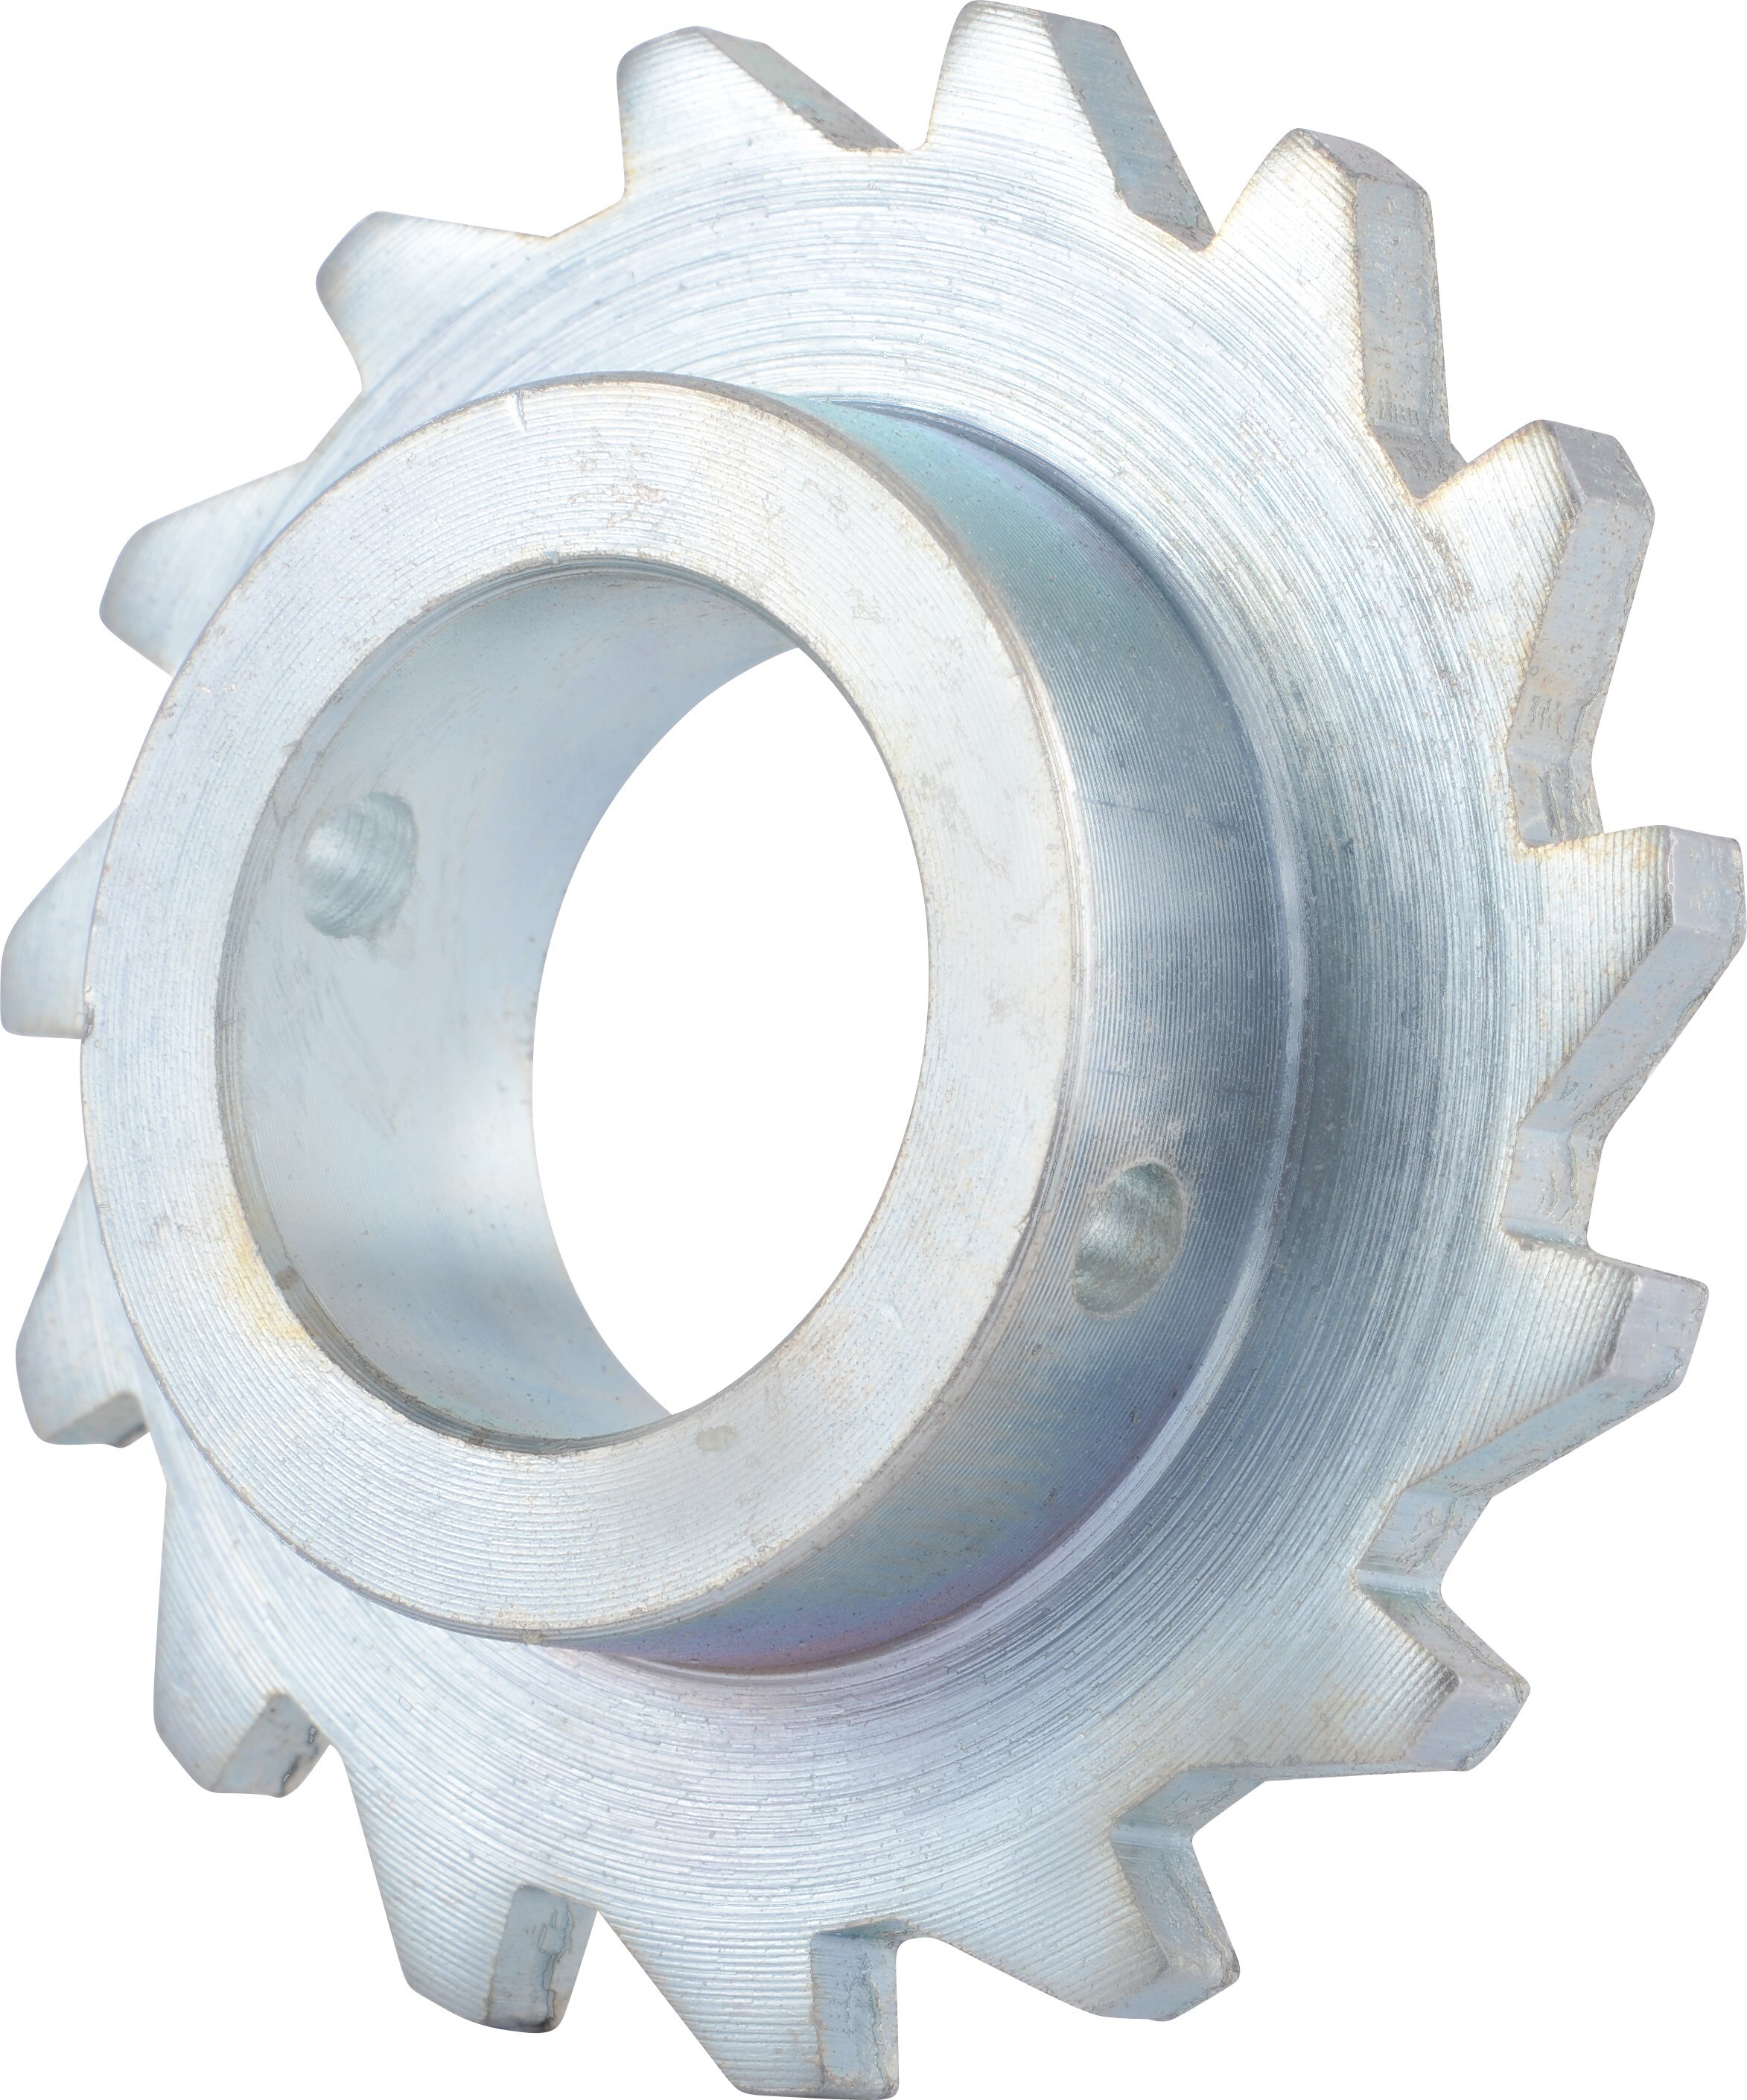 SAW TOOTH GEAR ASSY